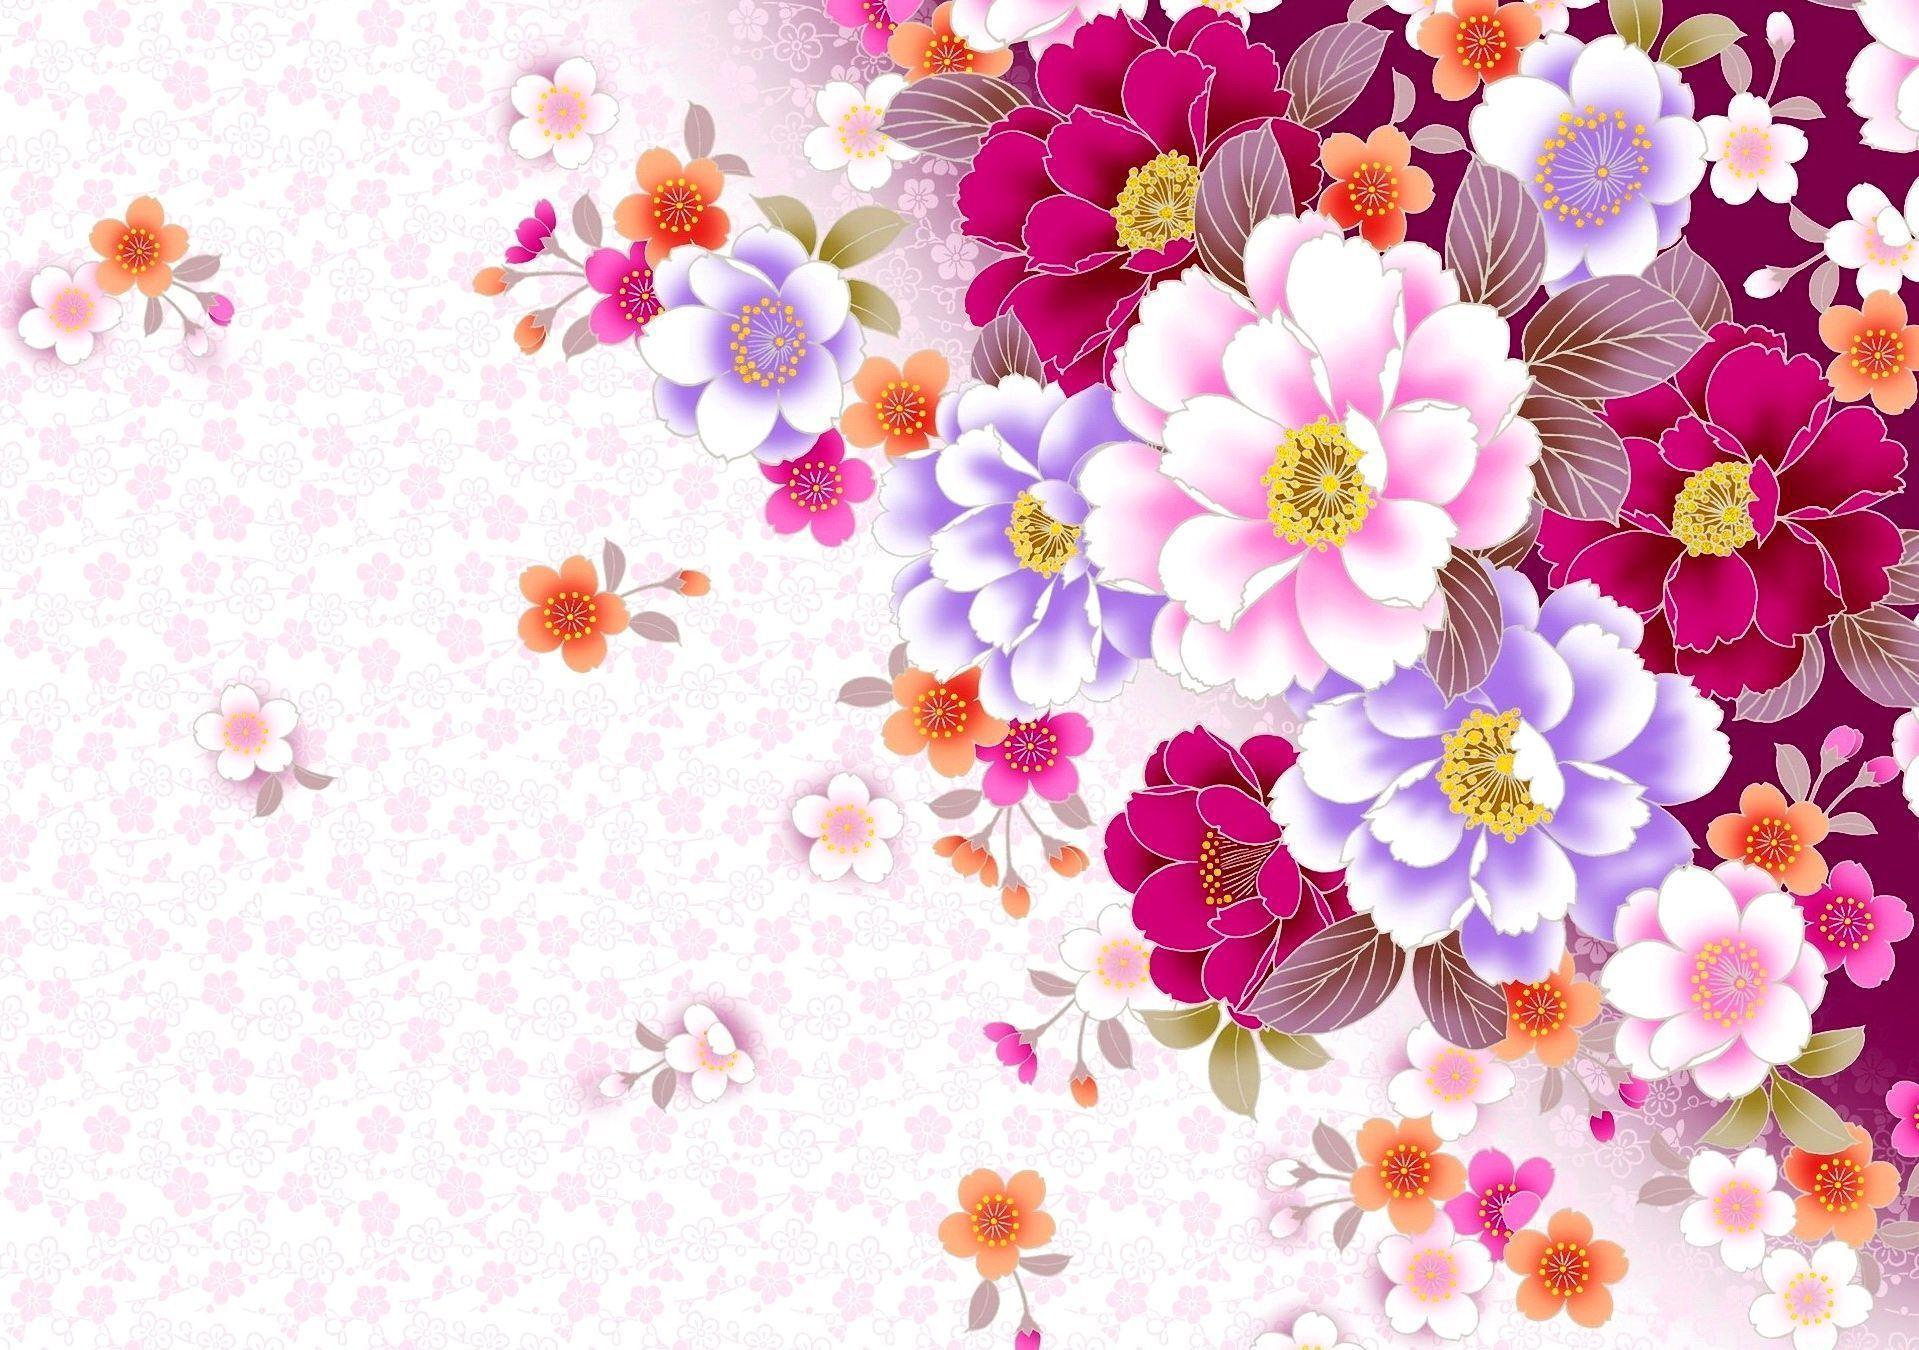 25 Luxury Images Of Floral Backgrounds